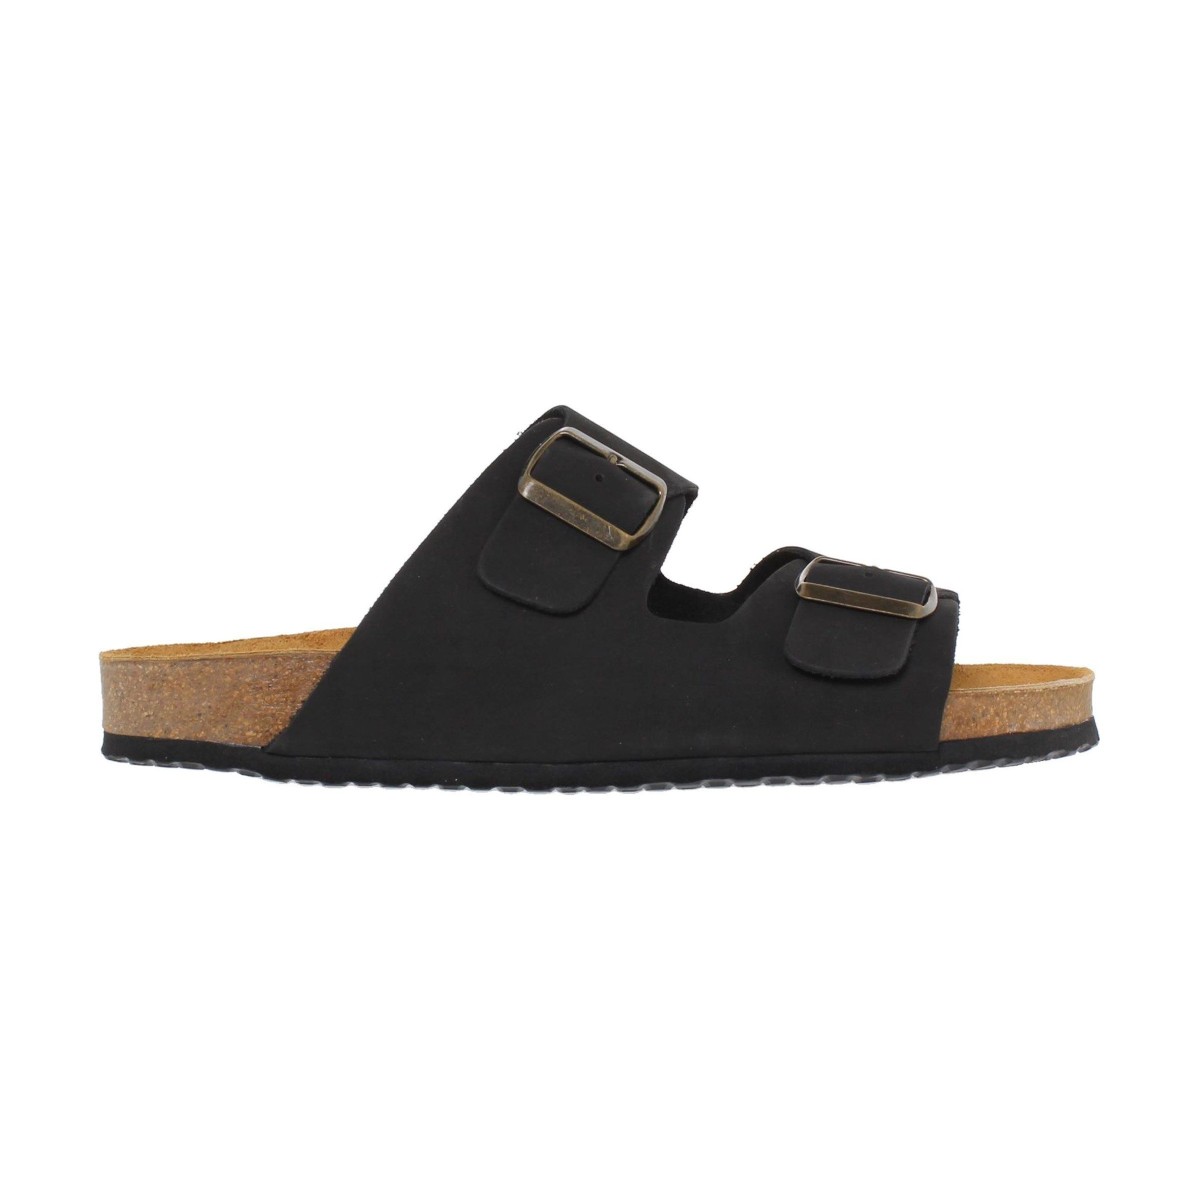 Black leather Bio sandals by Casual